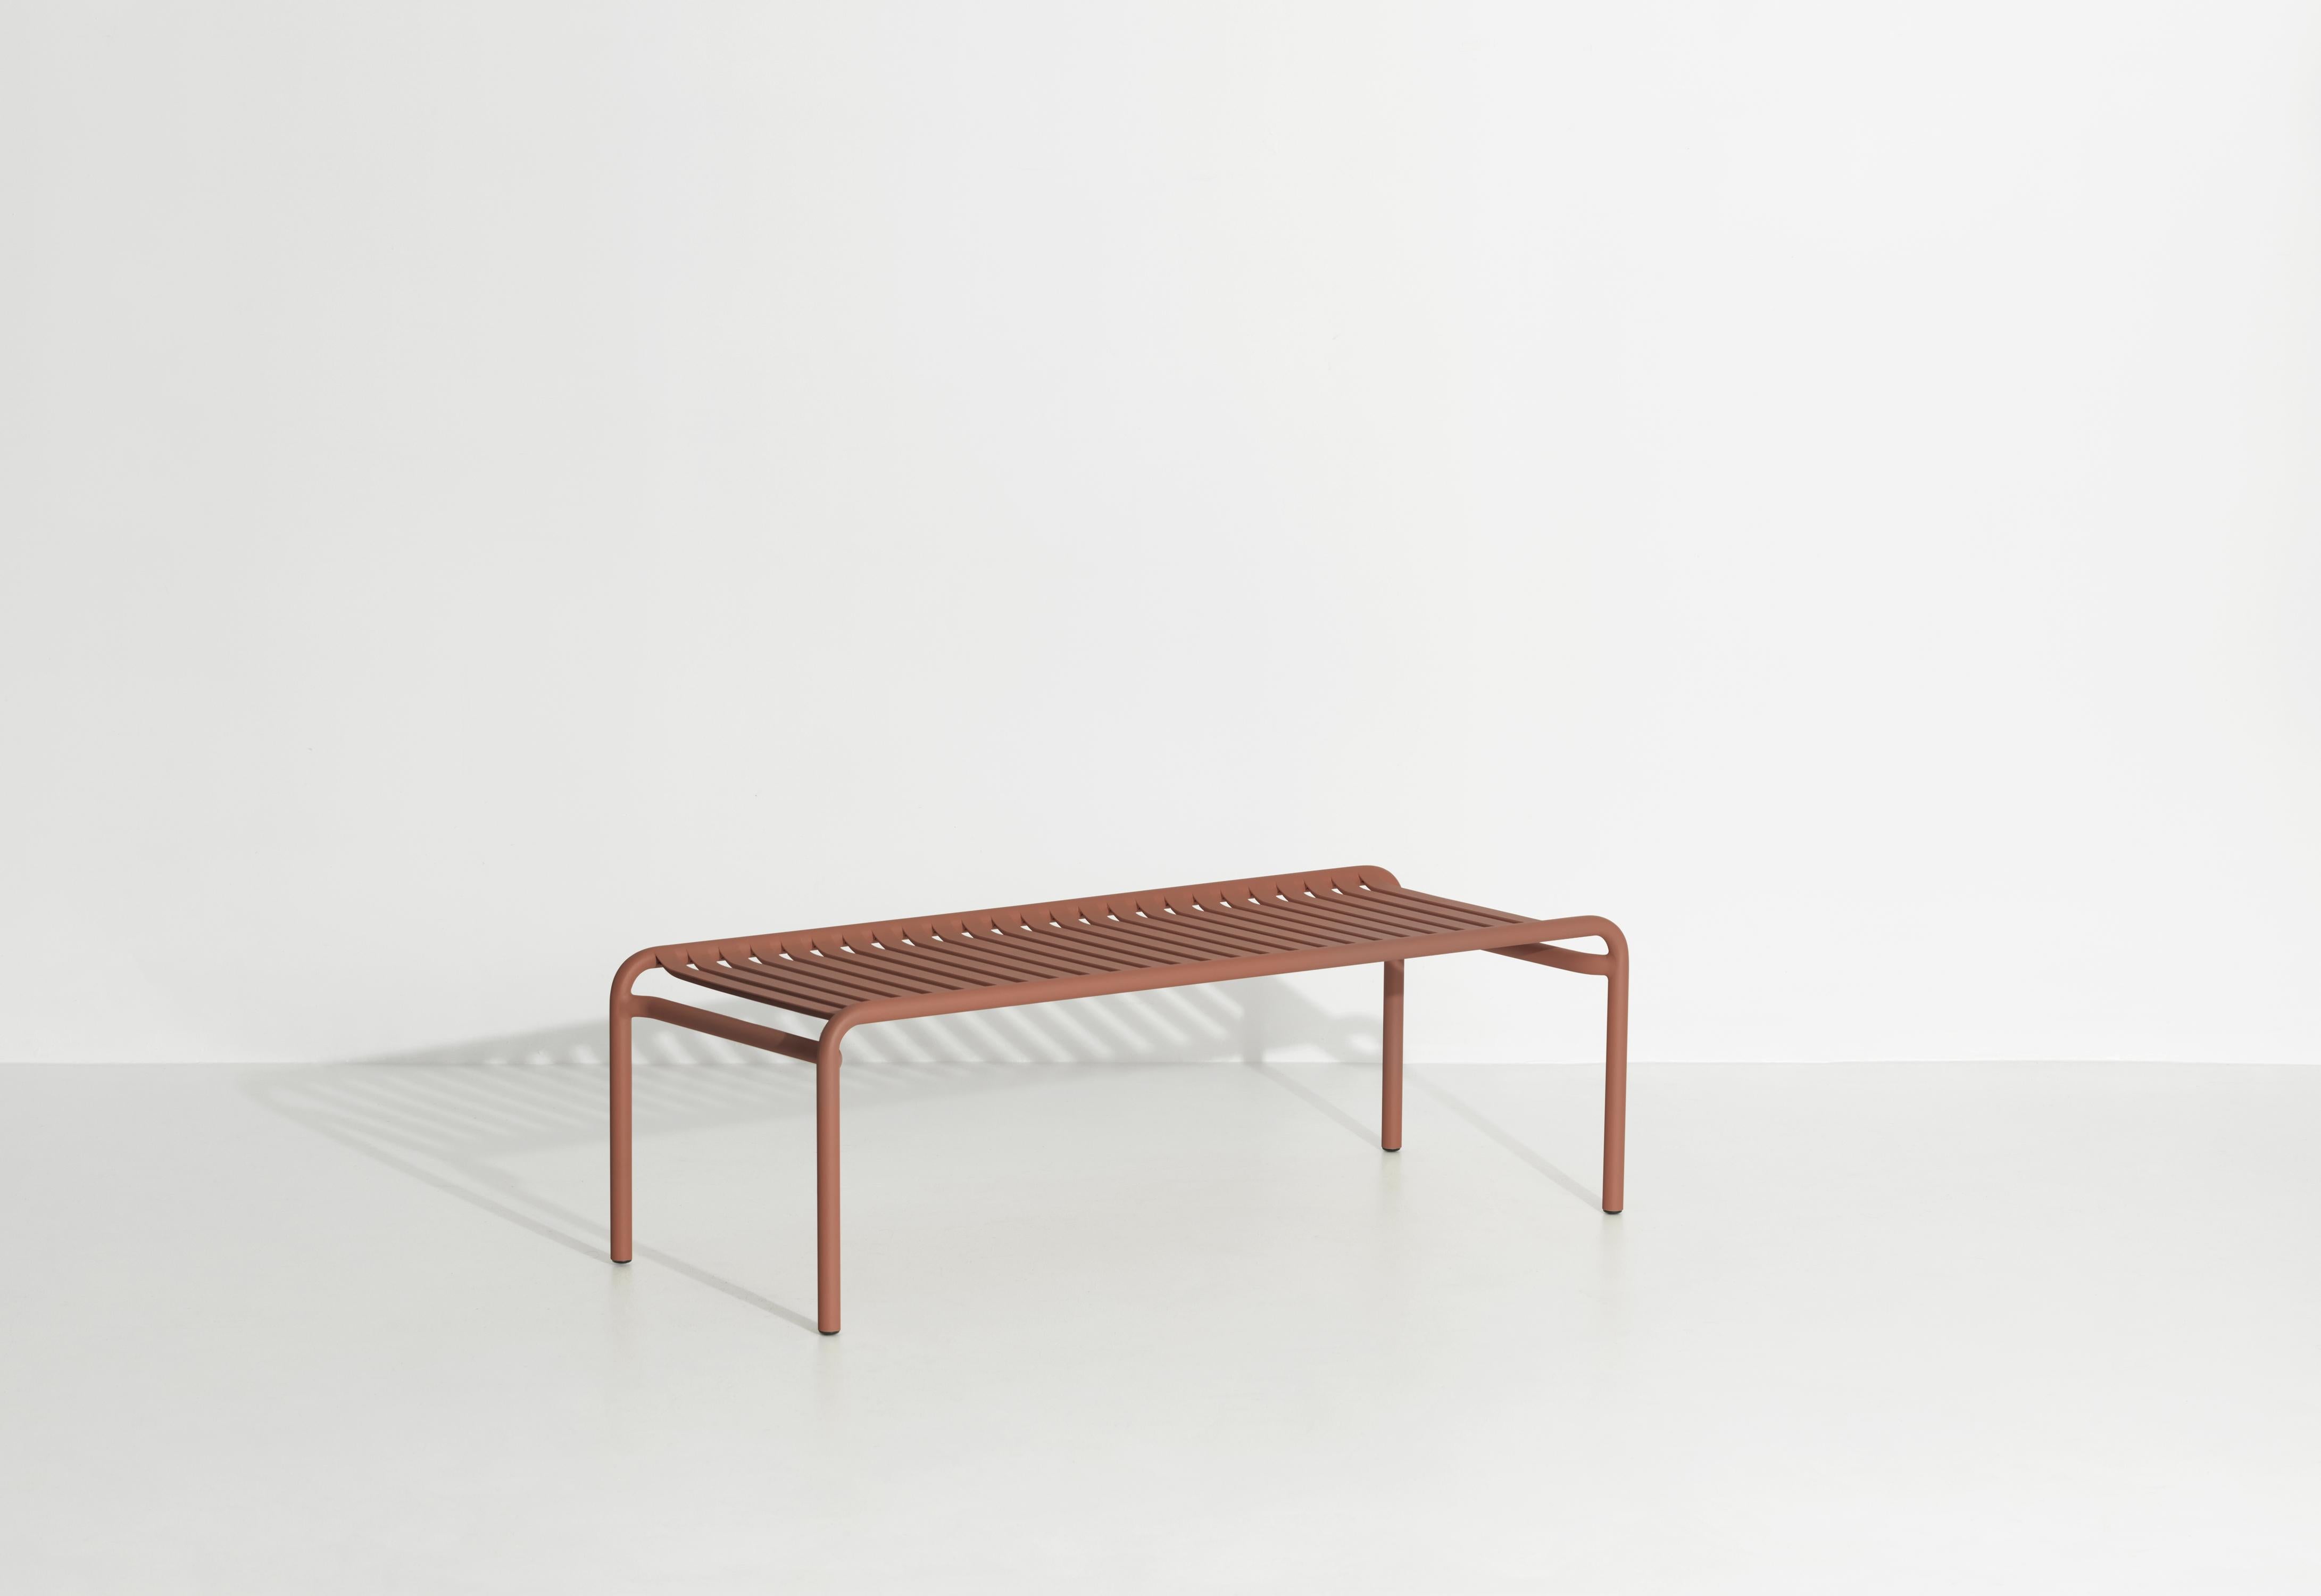 Petite Friture Week-End Long Coffee Table in Terracotta Aluminium by Studio BrichetZiegler, 2017

The week-end collection is a full range of outdoor furniture, in aluminium grained epoxy paint, matt finish, that includes 18 functions and 8 colours